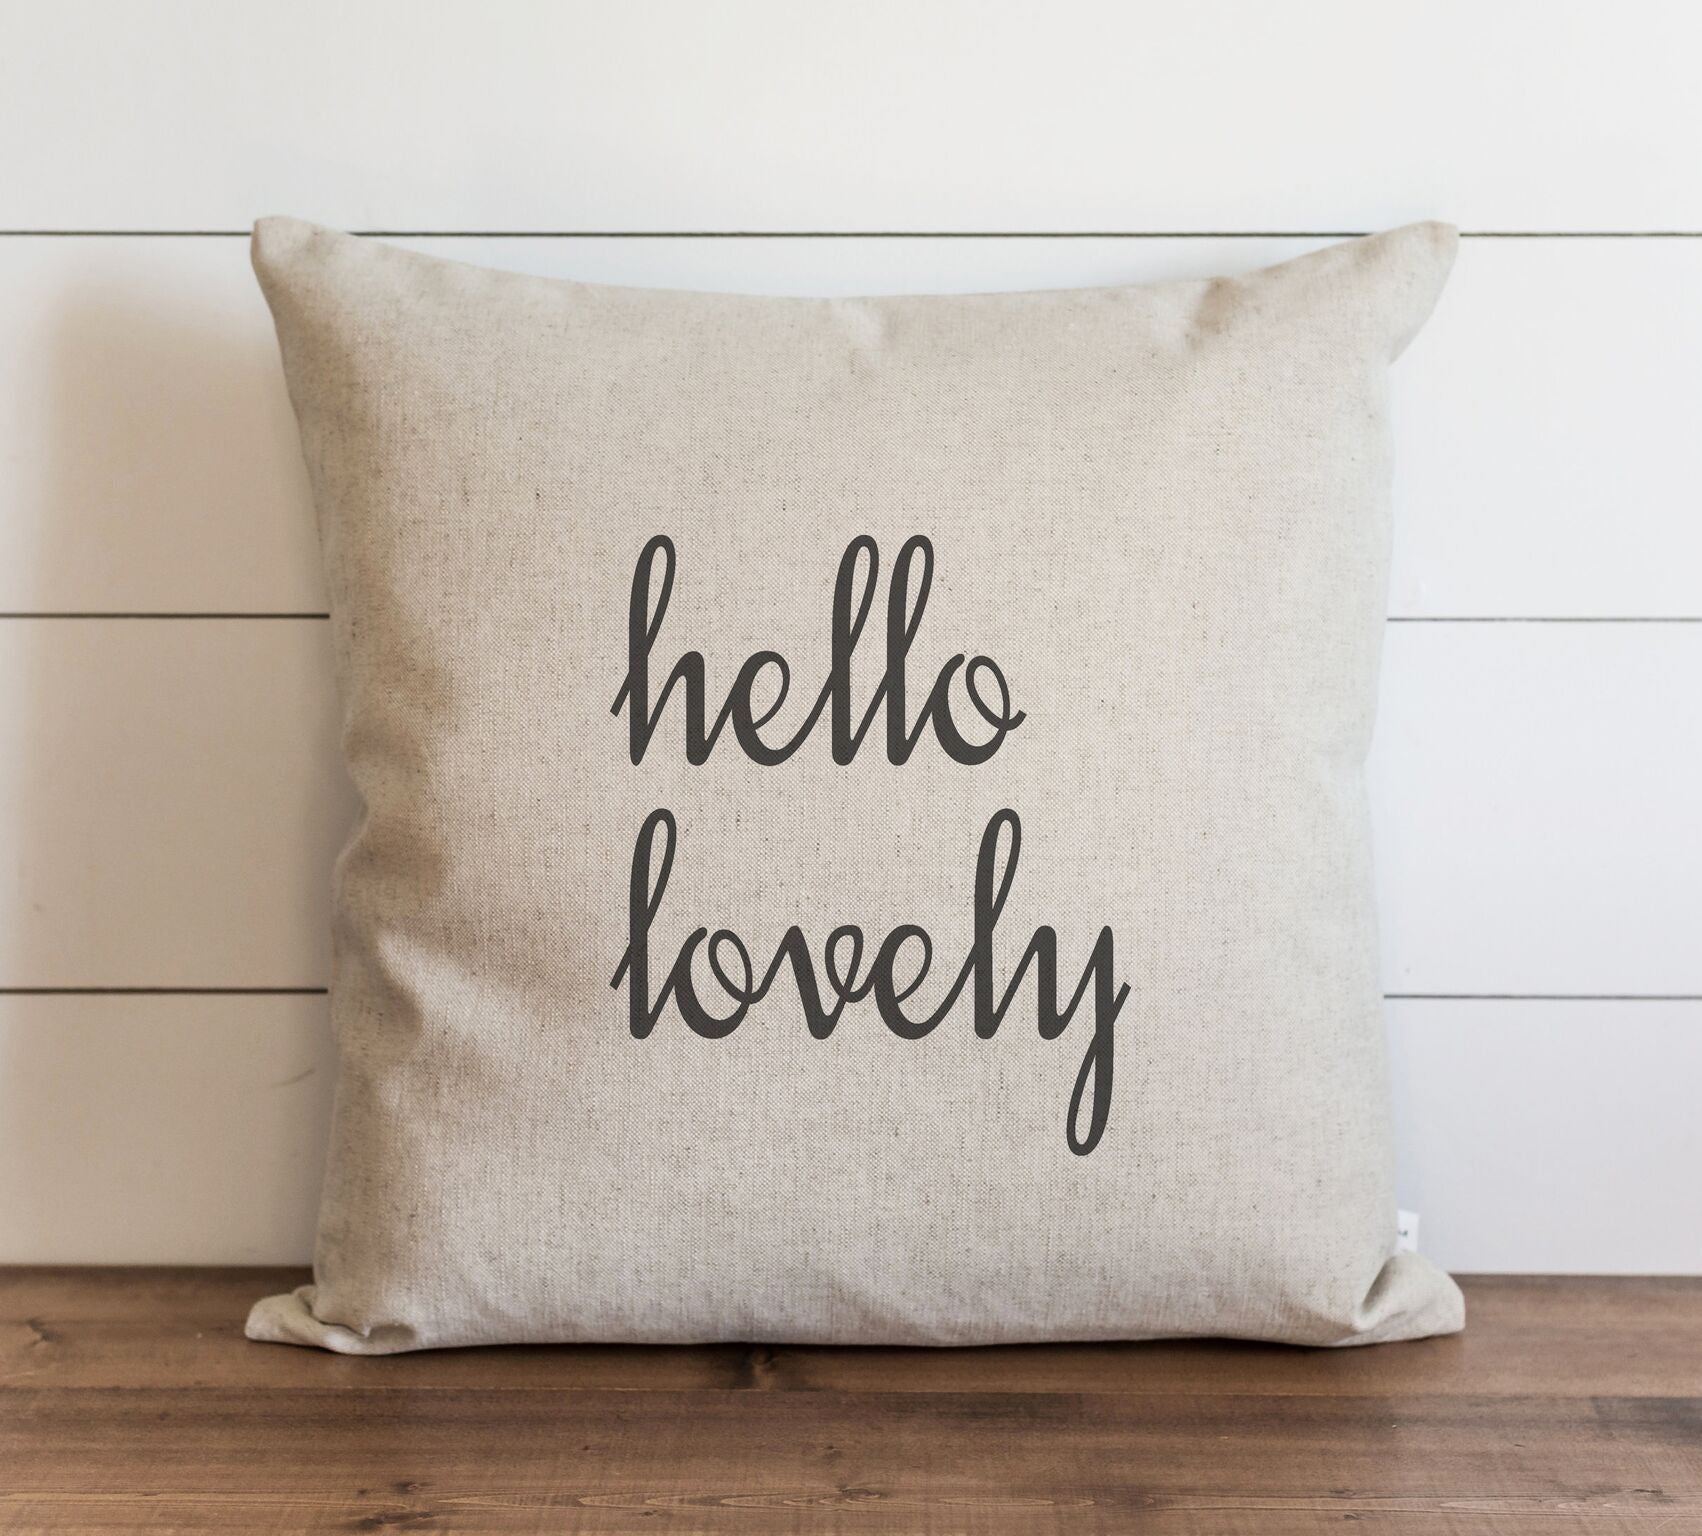 White pillow with black text hello lovely down insert